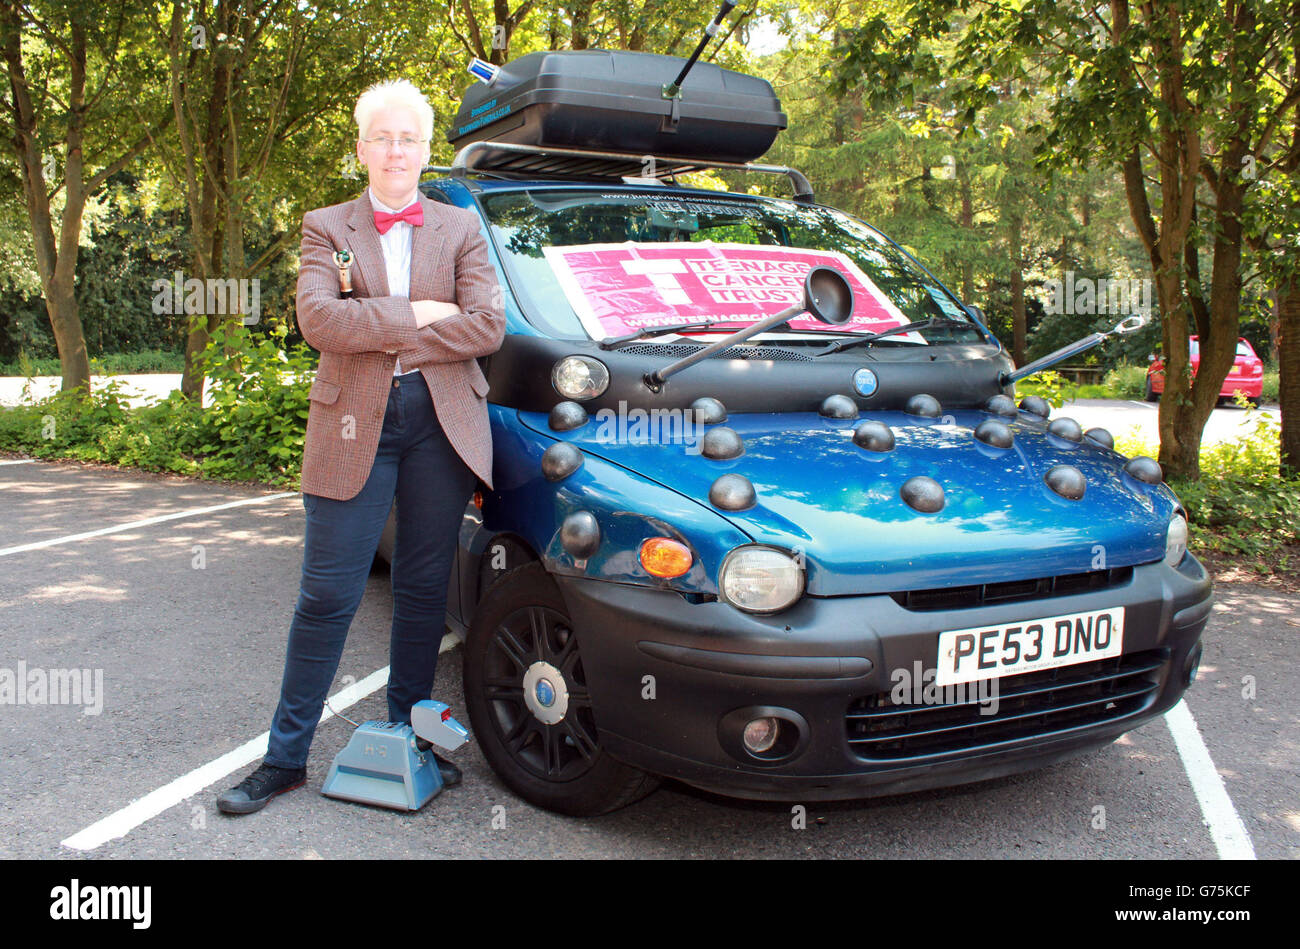 Clare Brookes, dressed as Doctor Who, is part of a team tackling the Wacky Rally across Europe in their specially modified Dalek car, raising money for the Teenage Cancer Trust. Stock Photo